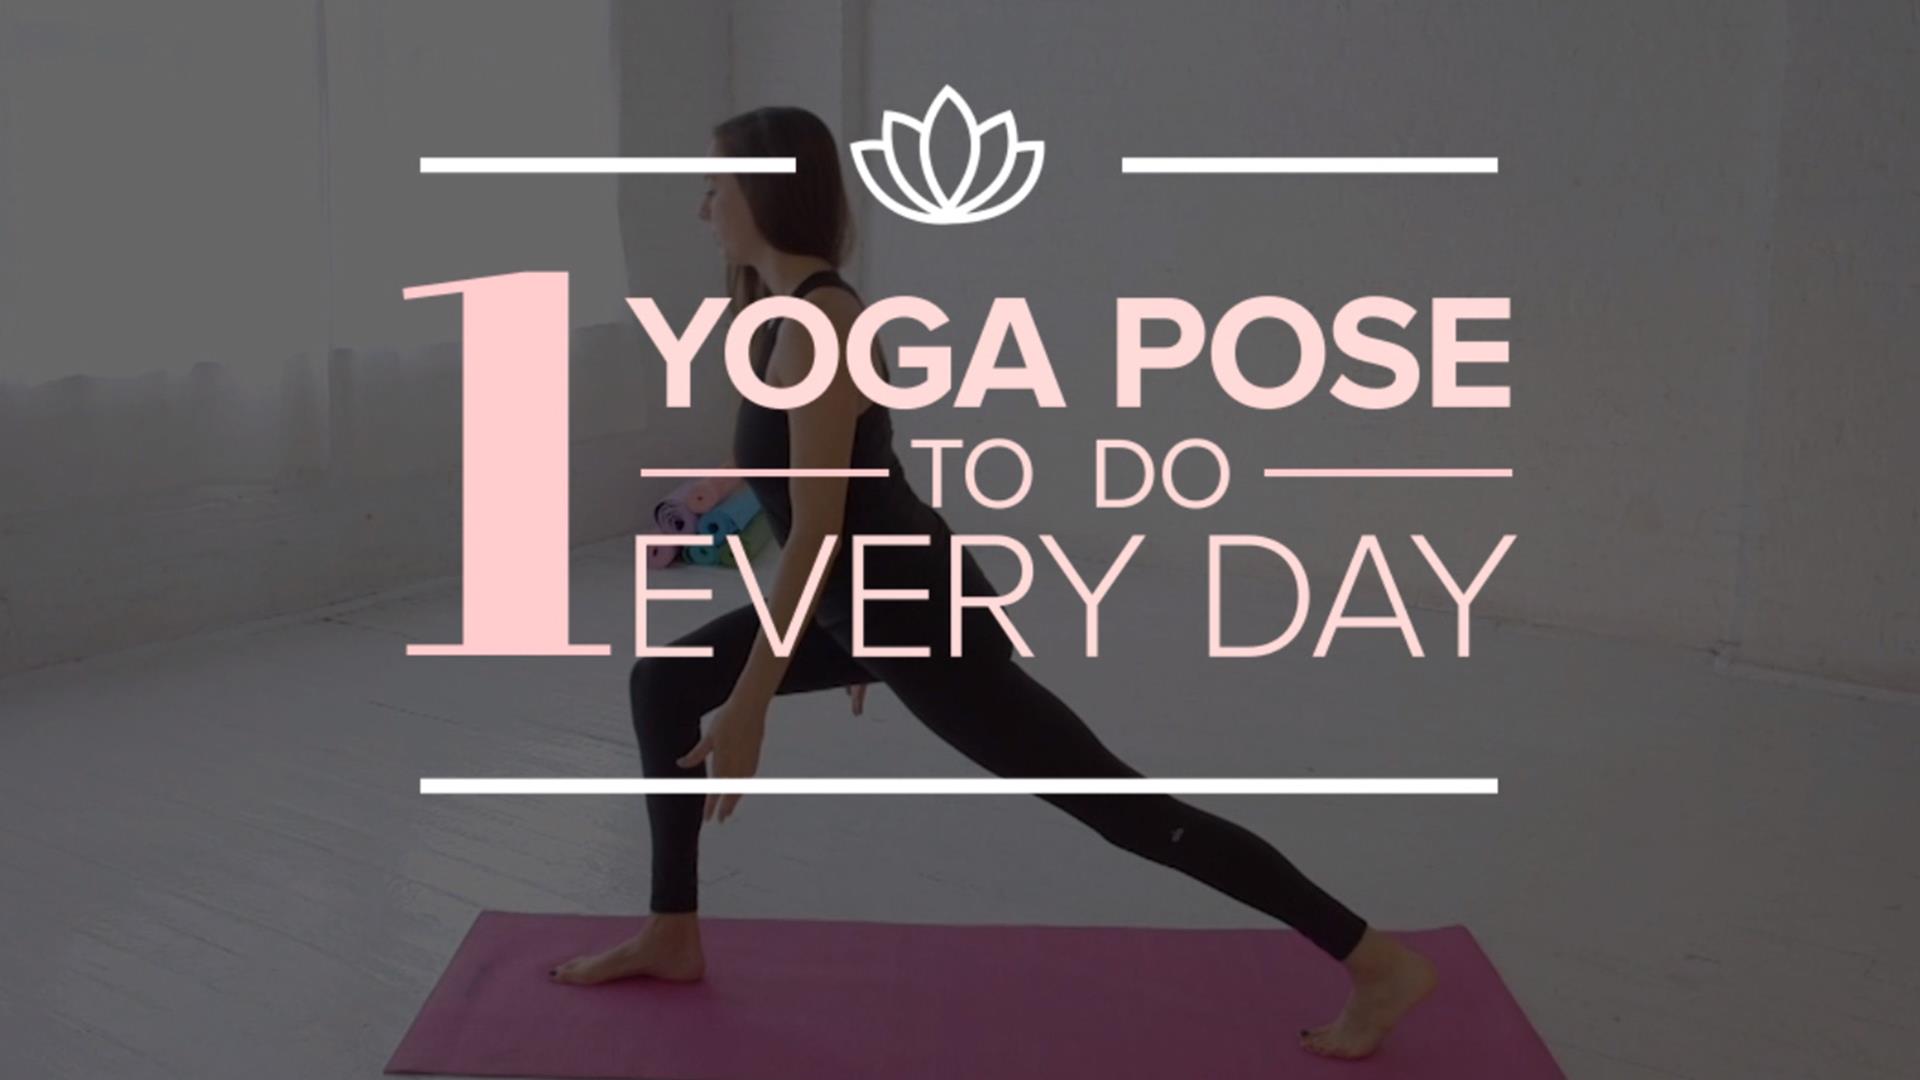 7 Yoga Poses for Daily Yoga routine and fitness, benefits of Yoga Poses -  Lead a Healthy Life - Quora